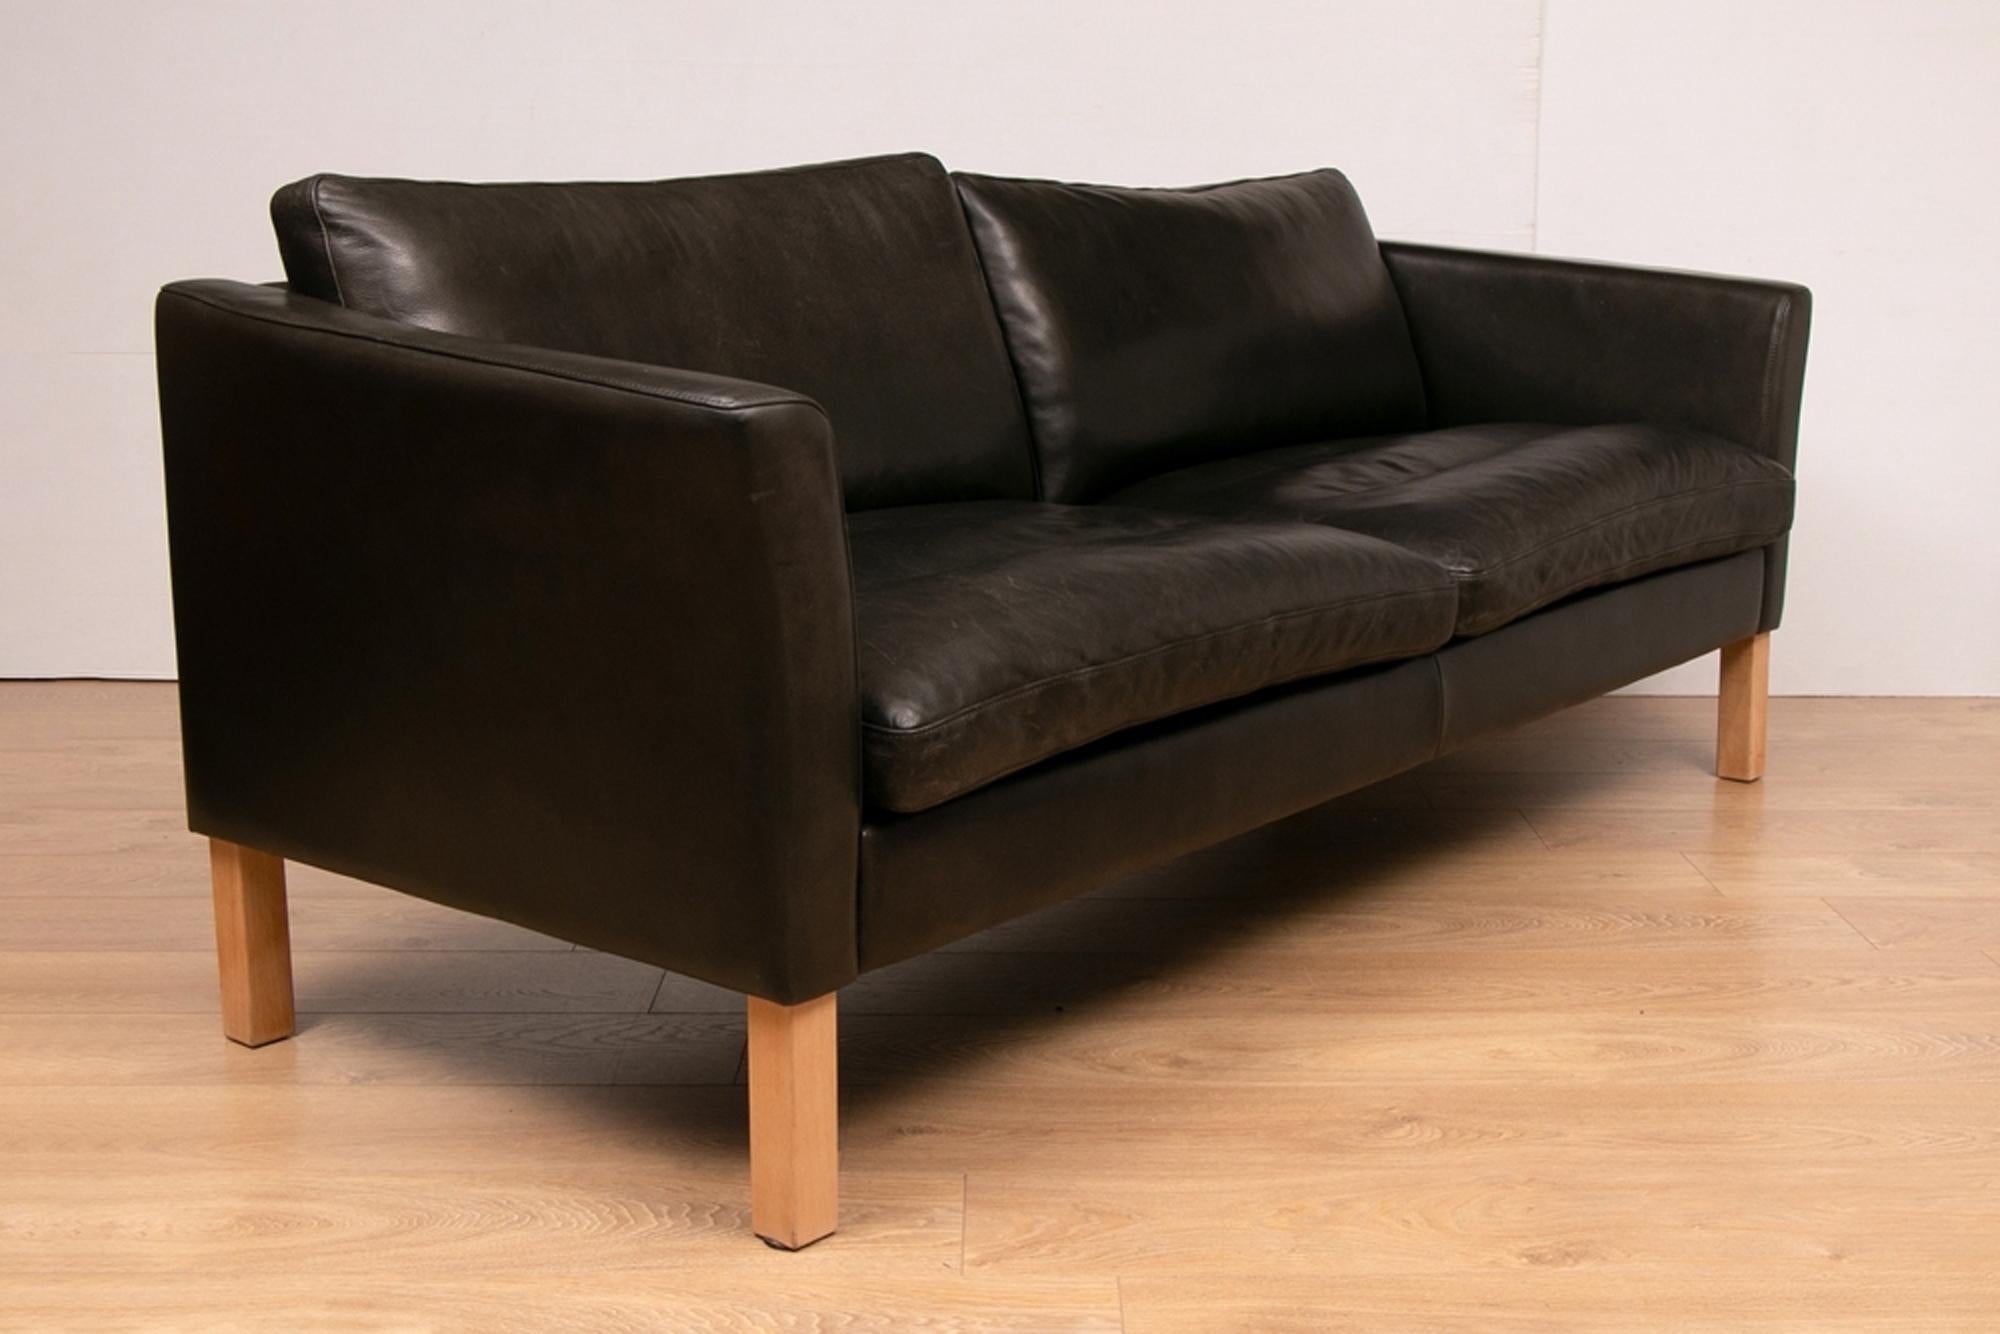 A really good quality Classic Danish black leather sofa by Fritz Hansen for Stouby.
This is incredibly comfortable and the leather is in excellent original condition-home ready.